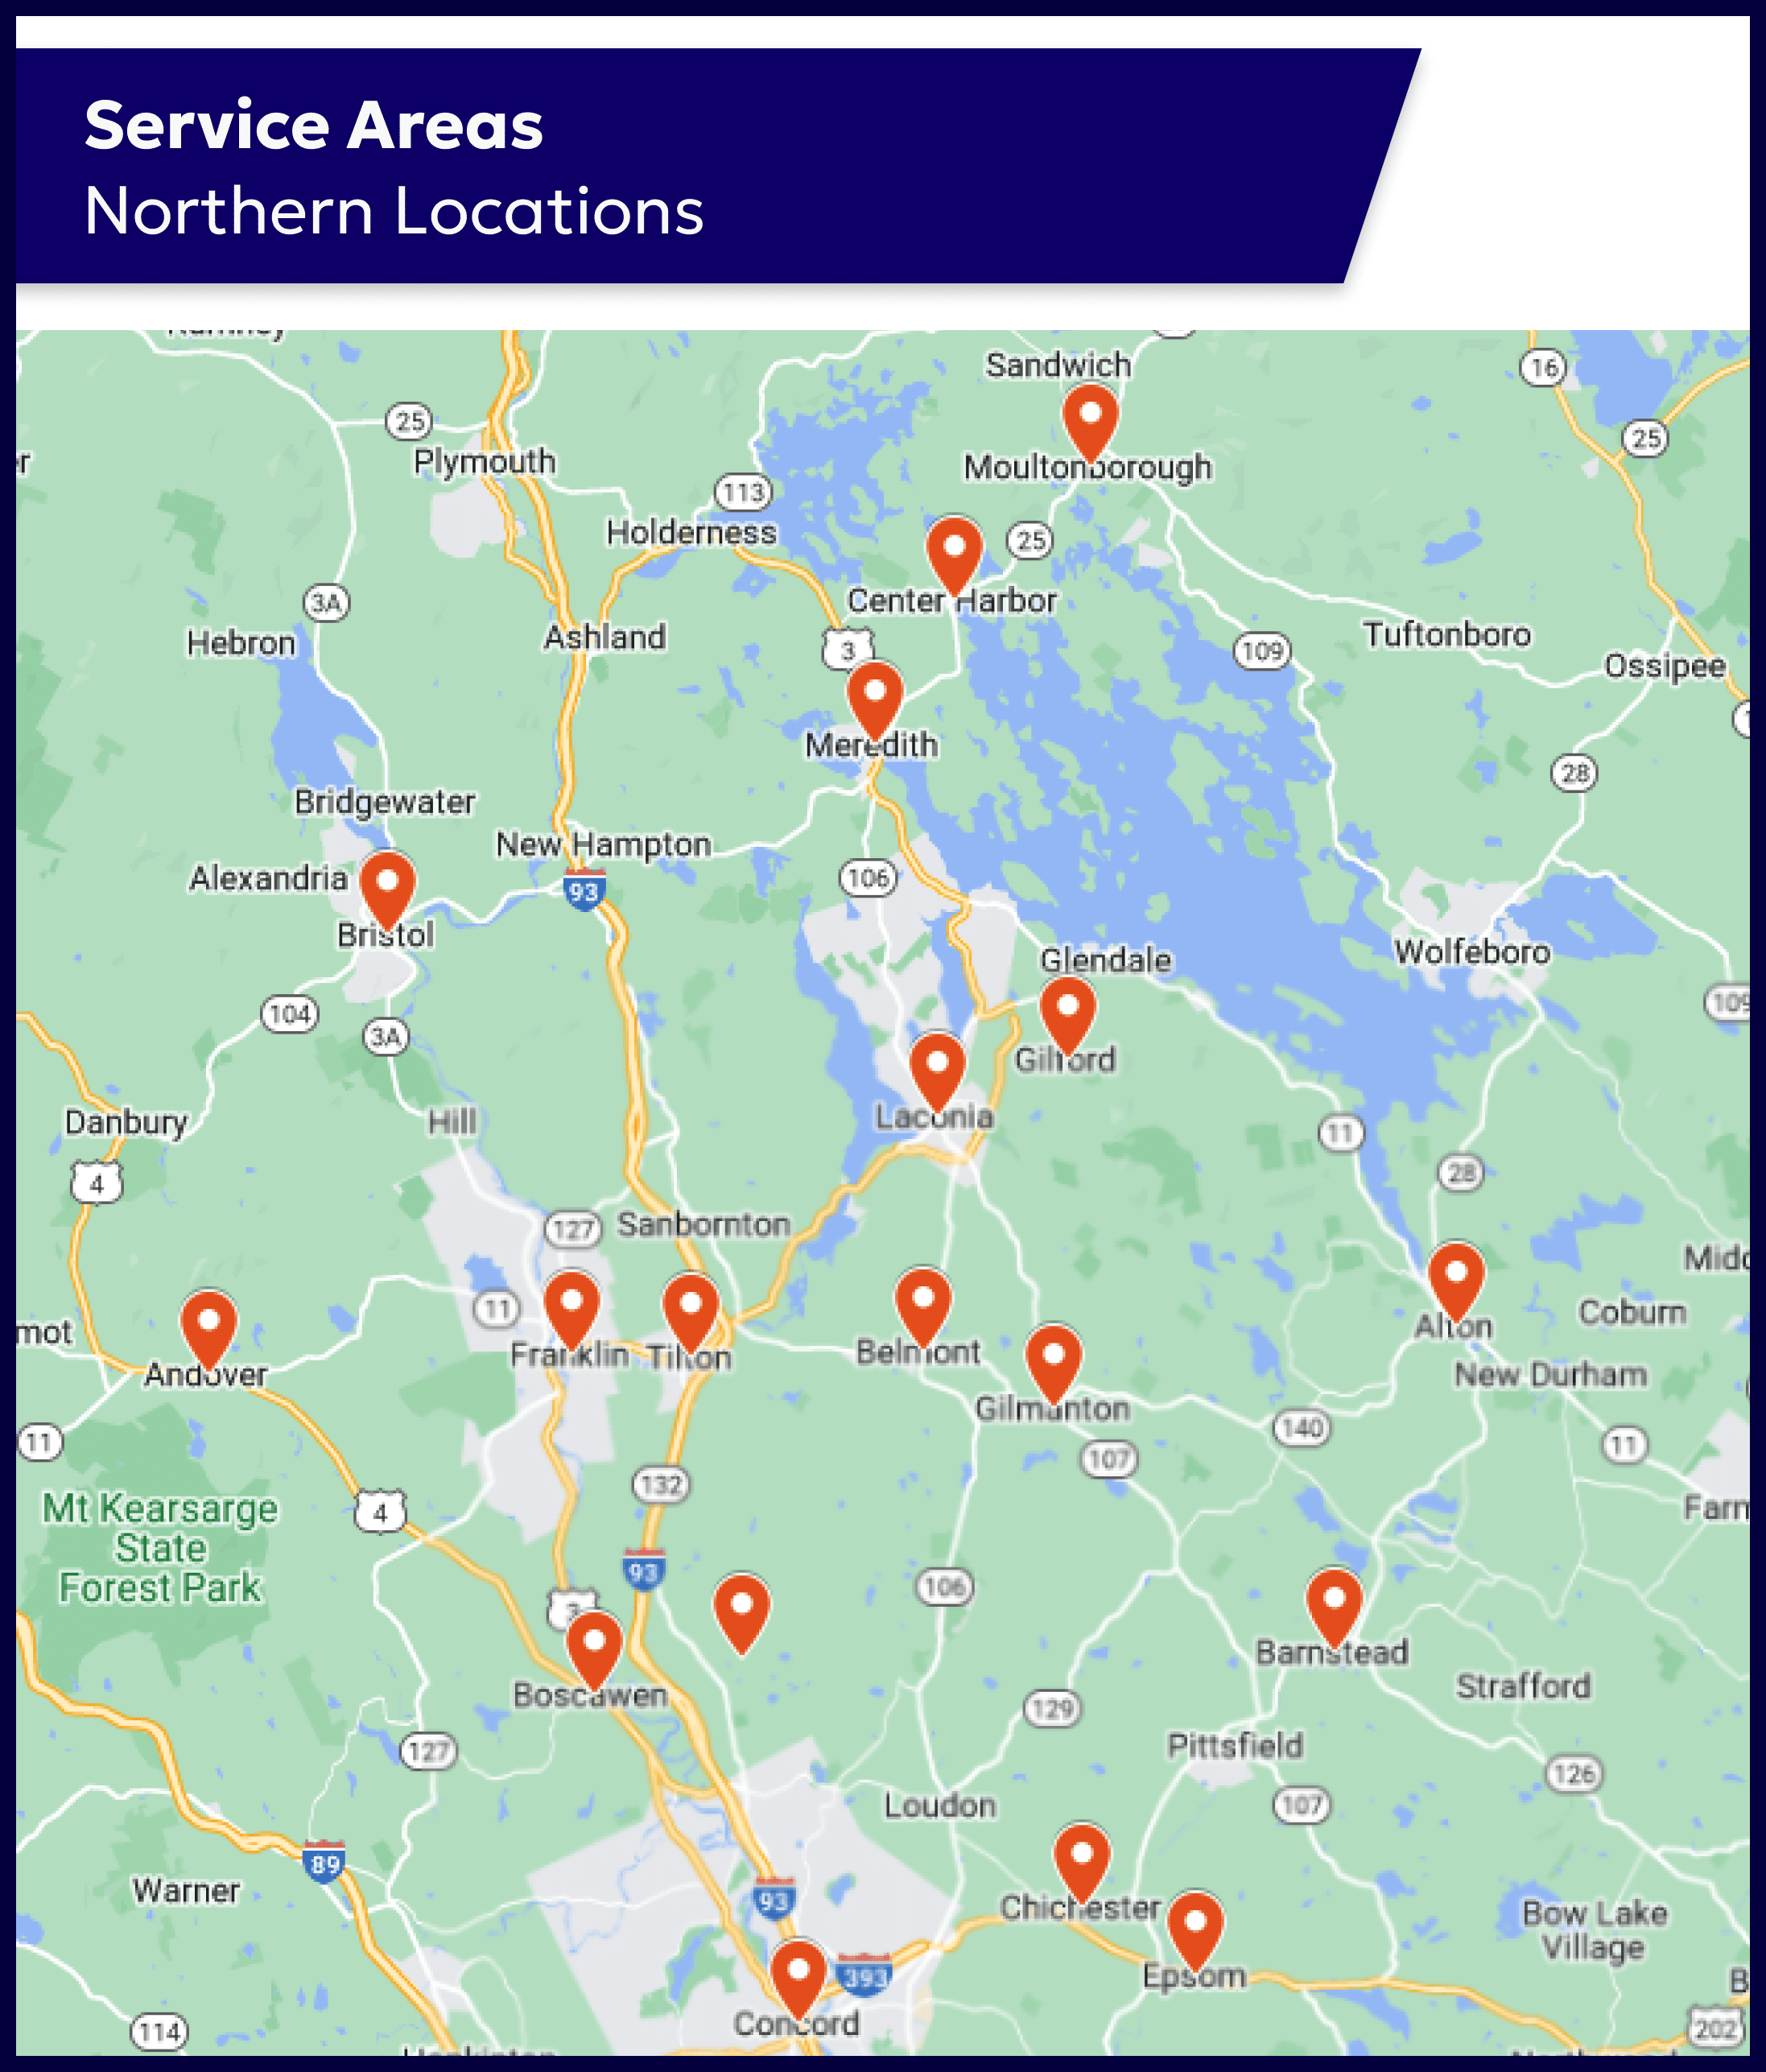 Map of Joyce Heating and Cooling Service Areas Northern Region